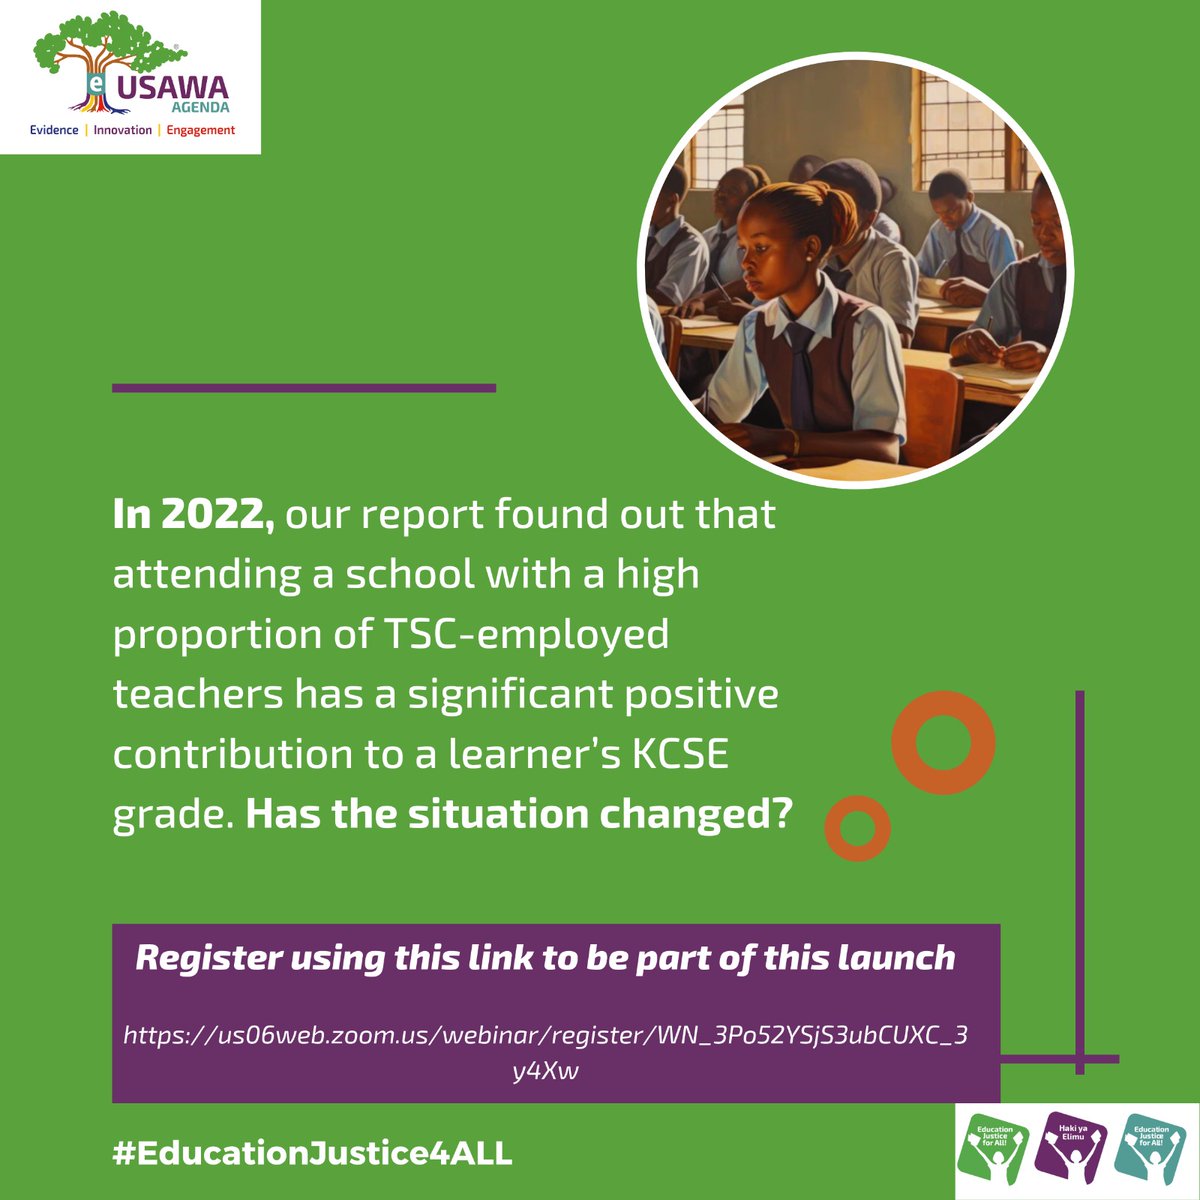 The Secondary School Survey 2024 launch will be a platform for meaningful dialogue and action in education reform.

#EducationJustice4ALL
Usawa Agenda